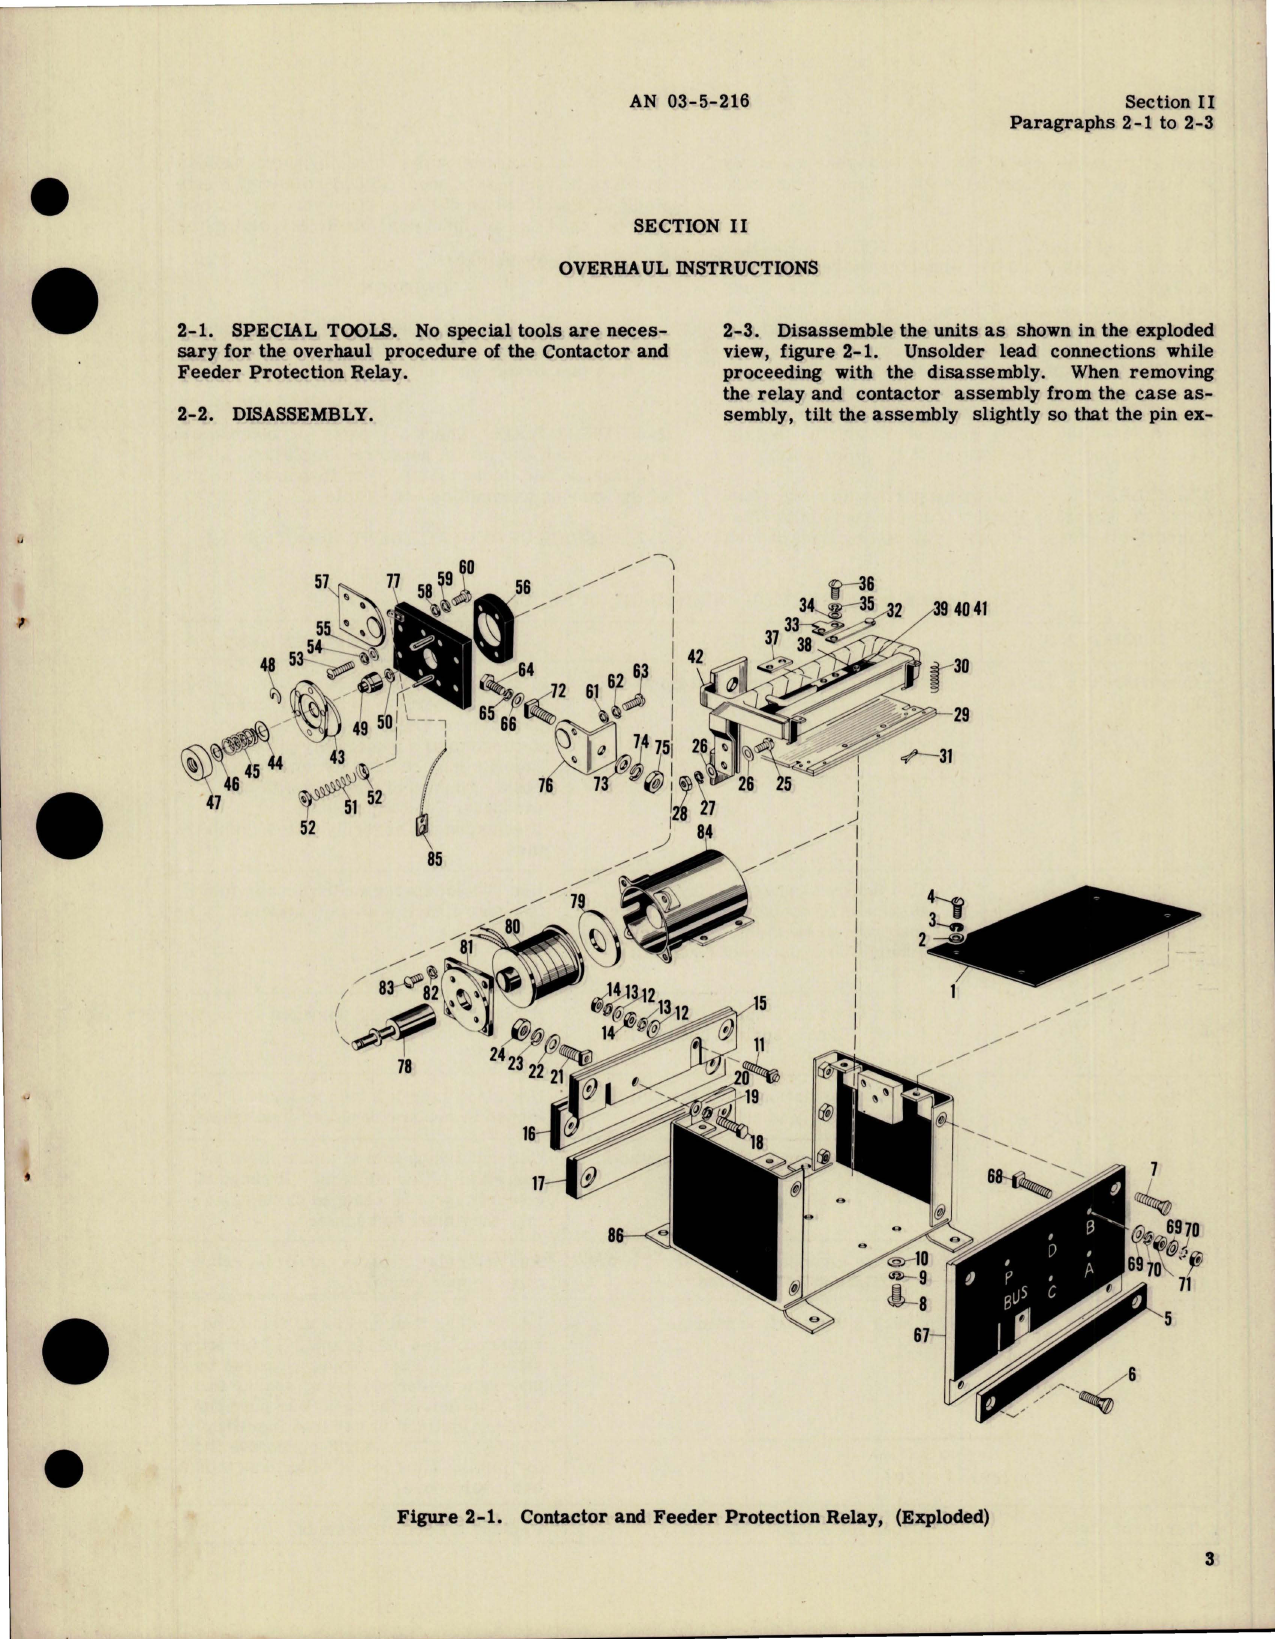 Sample page 5 from AirCorps Library document: Overhaul Instructions for Contactor and Feeder Protection Relay - Type AVR-182 - Parts A24A9336